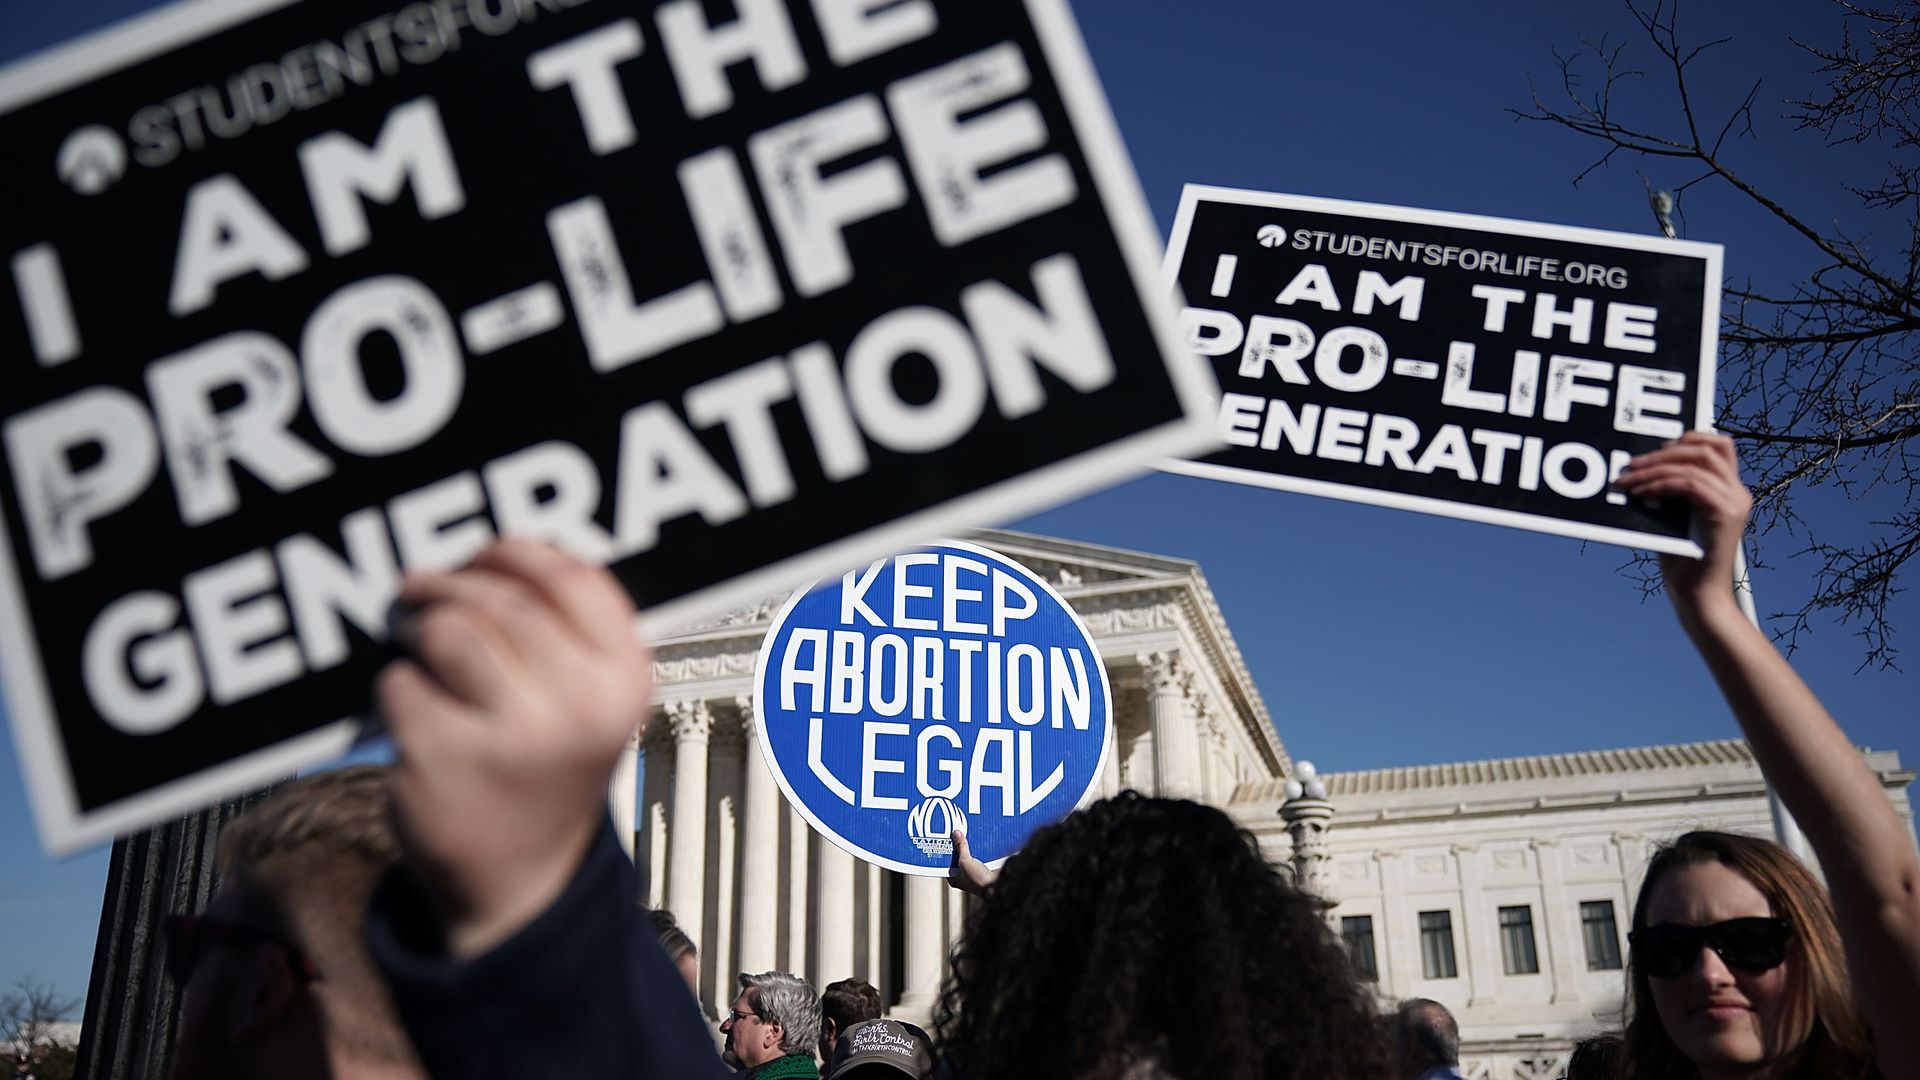 Pro-life activists hold up signs in front of a pro-choice activist.